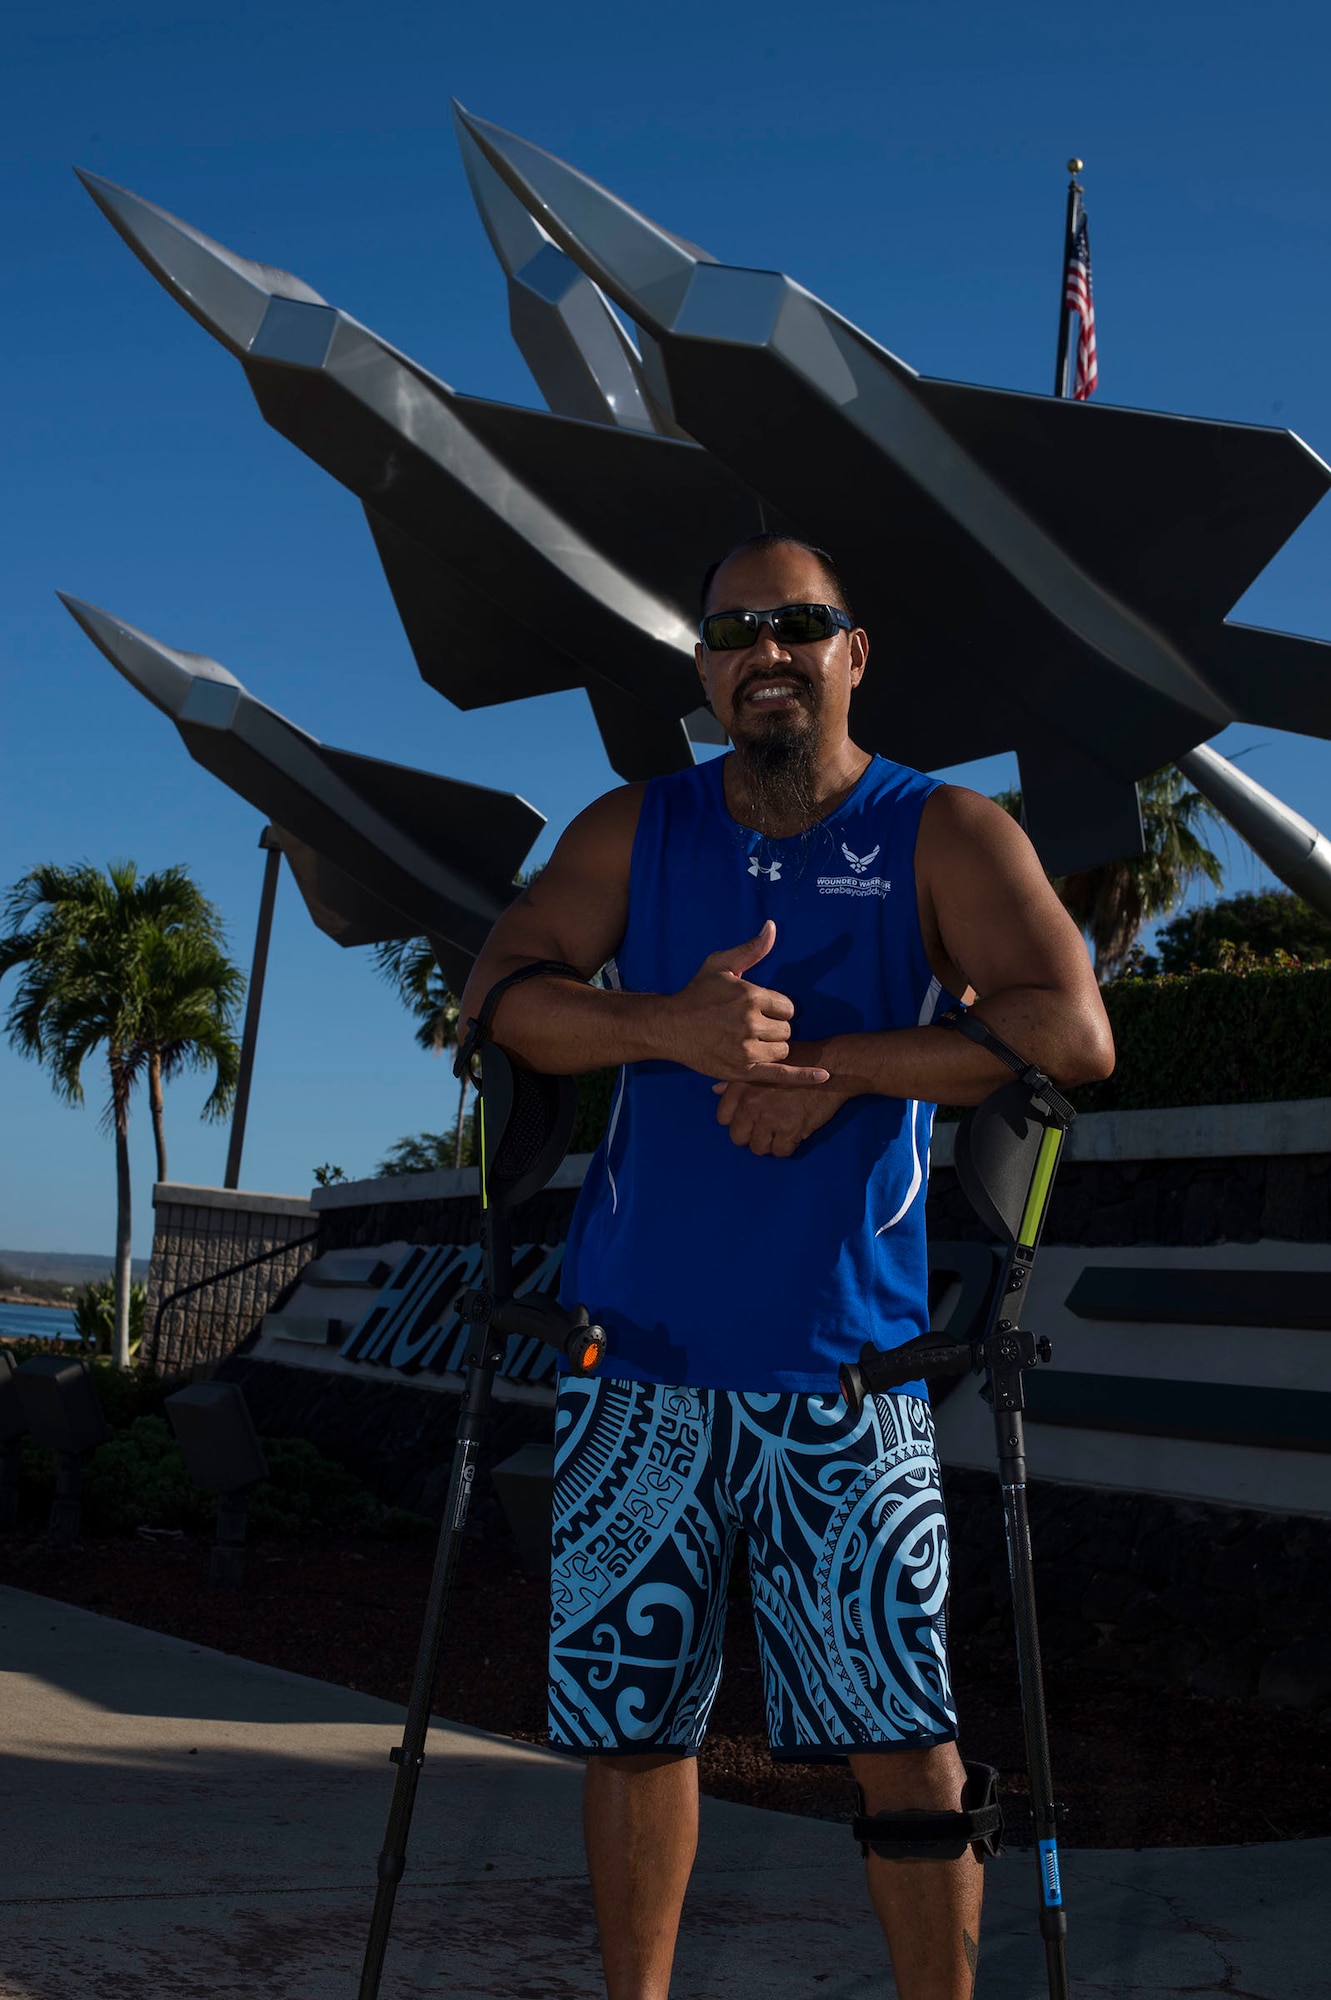 Retired Chief Master Sgt. Garrett Kuwada will be the torch bearer for the 2019 Wounded Warrior Games in Tampa, Florida. In September of 2016, Kuwada had a ruptured brain aneurysm resulting in blood around his brain and damage to his spinal cord and legs. He now suffers loss of coordination and balance, hearing, vision, speech and cognitive function. (U.S. Air Force photo by TSgt Heather Redman)